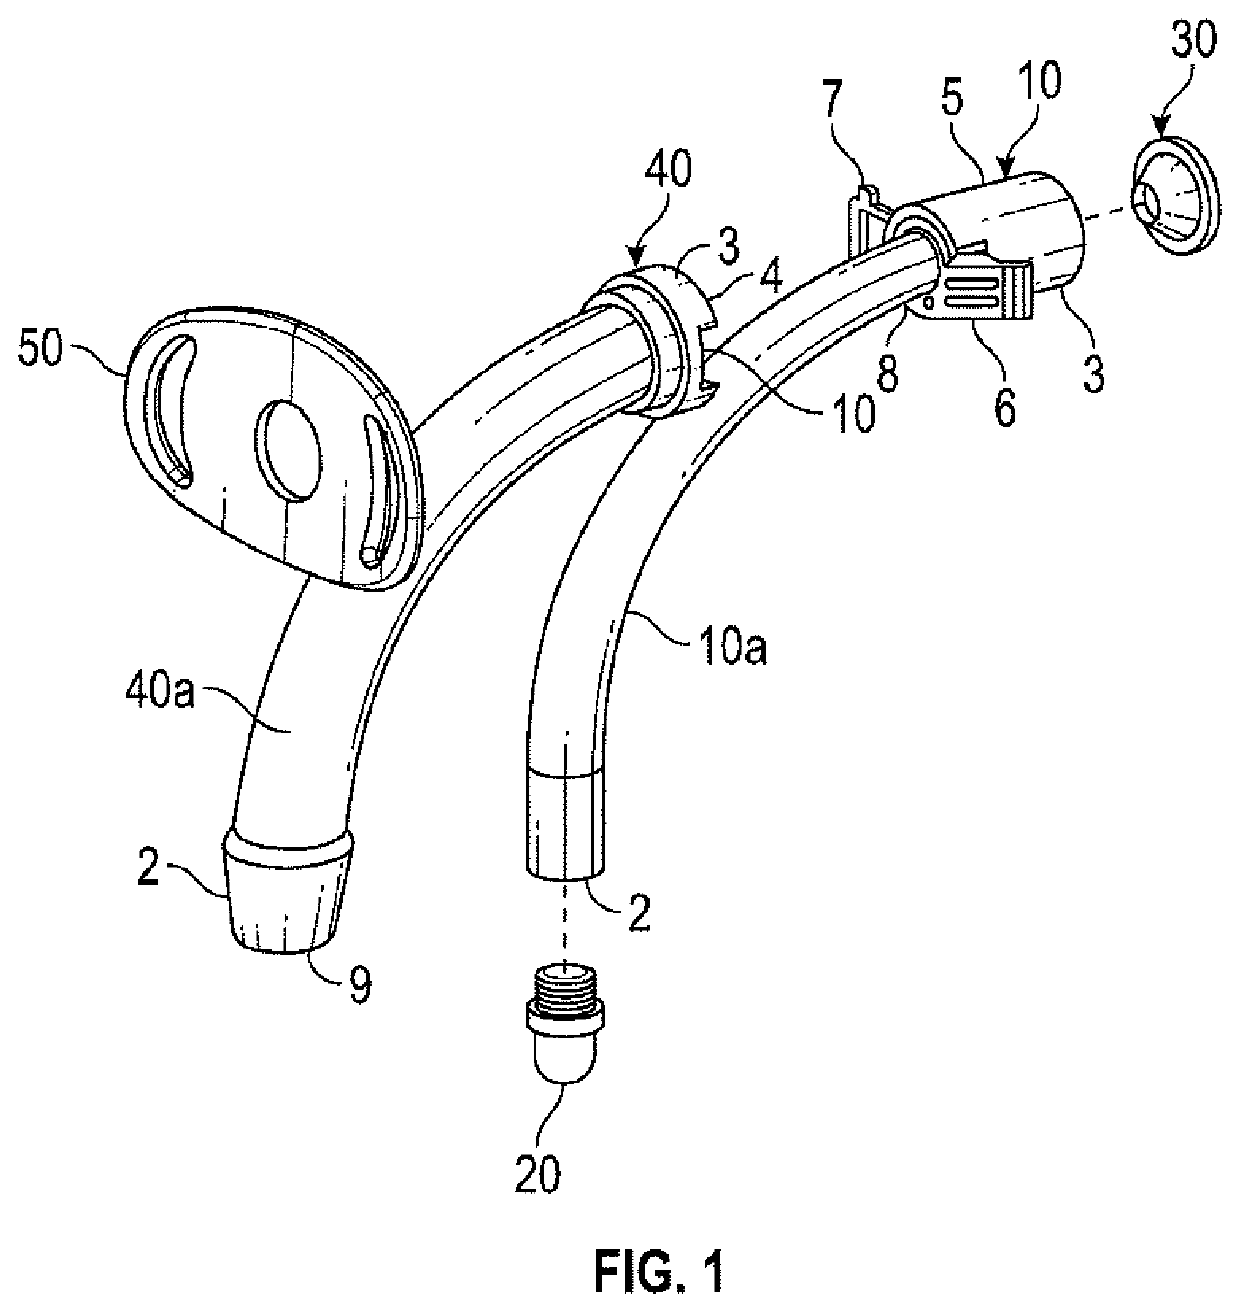 Device for training tracheal suctioning